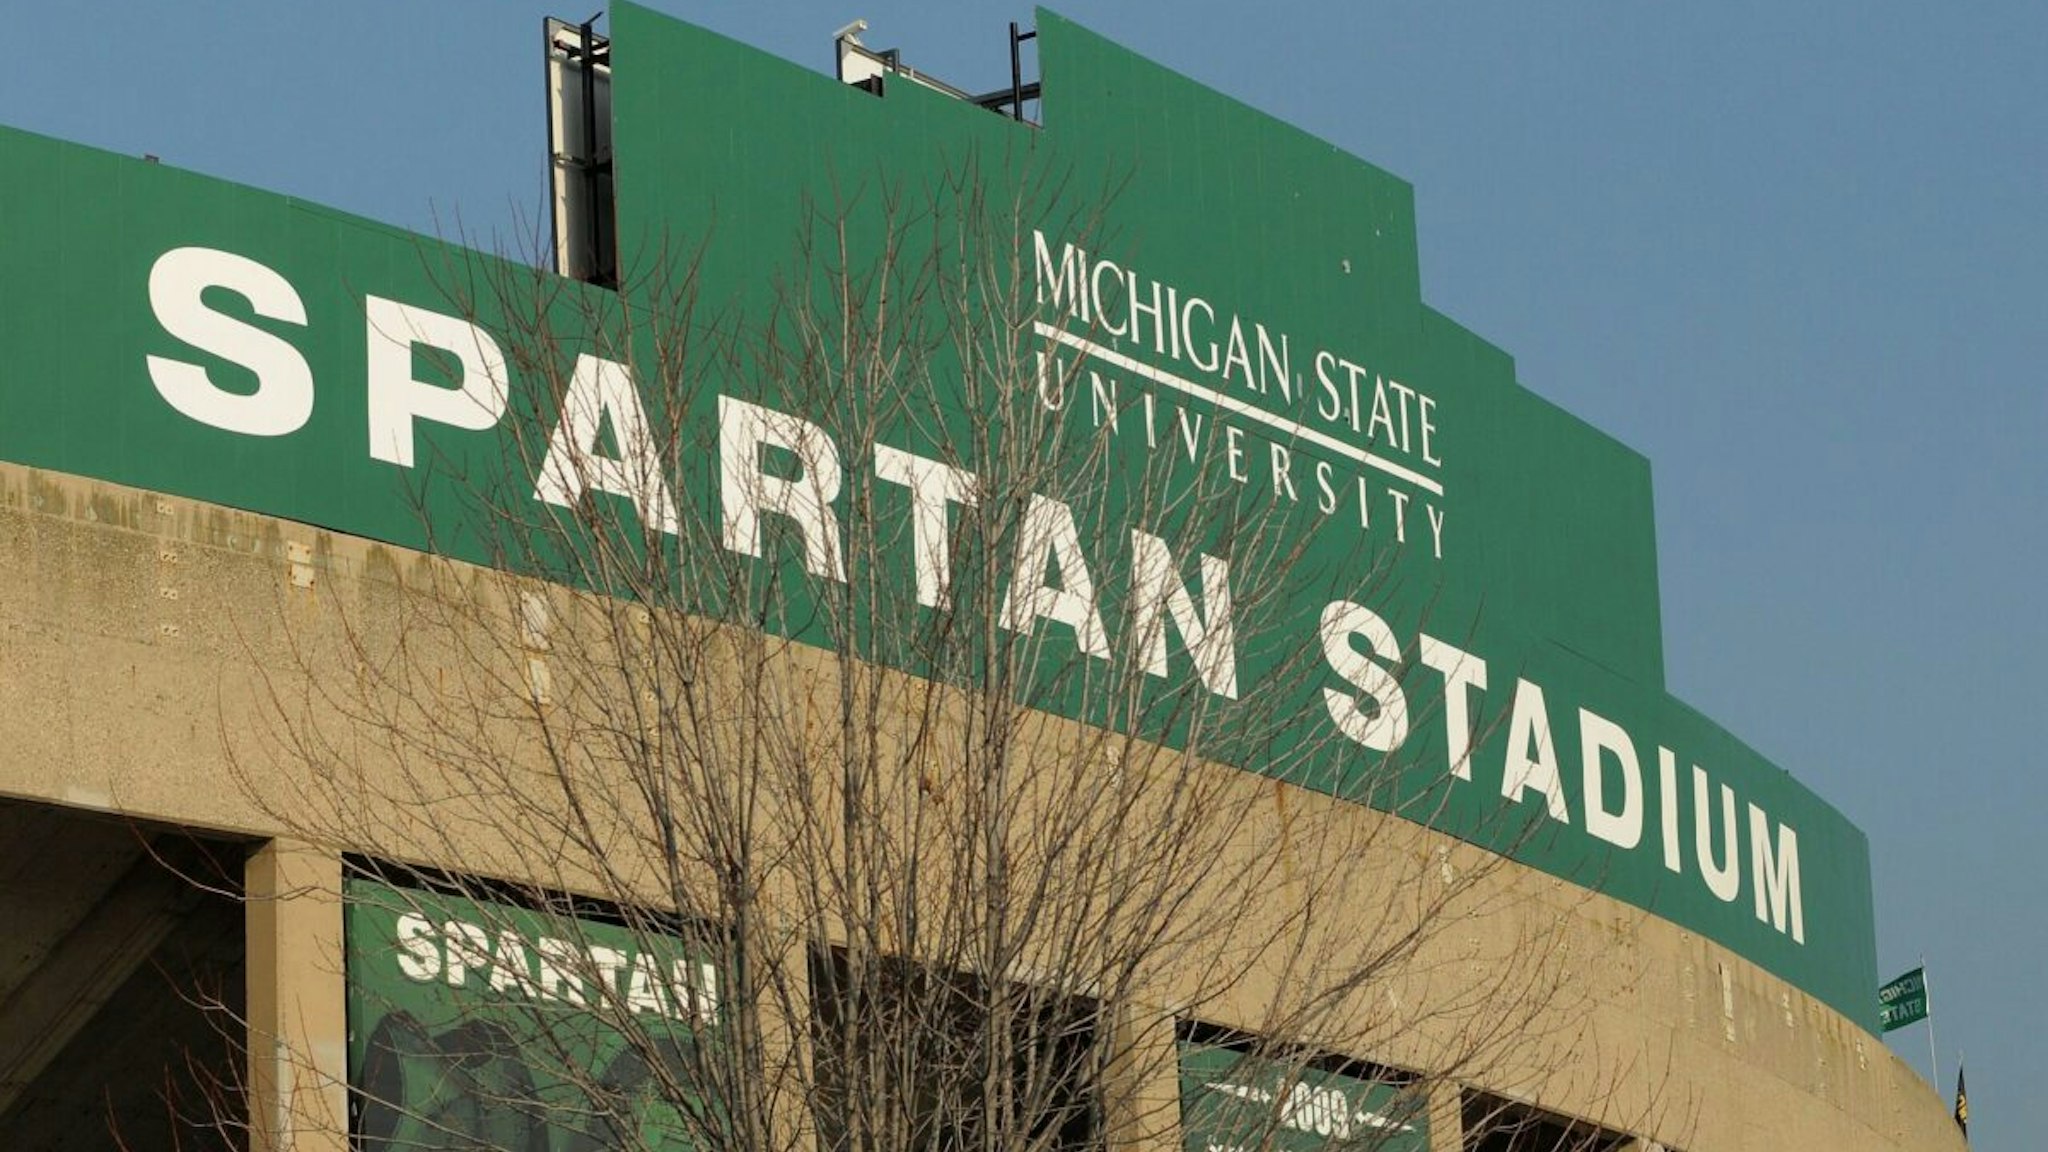 A general view of the exterior of Spartan Stadium before the game between the Michigan State Spartans and the Penn State Nittany Lions at Spartan Stadium on November 21, 2009 in East Lansing, Michigan. The Nittany Lions defeated the Spartans 42-14.